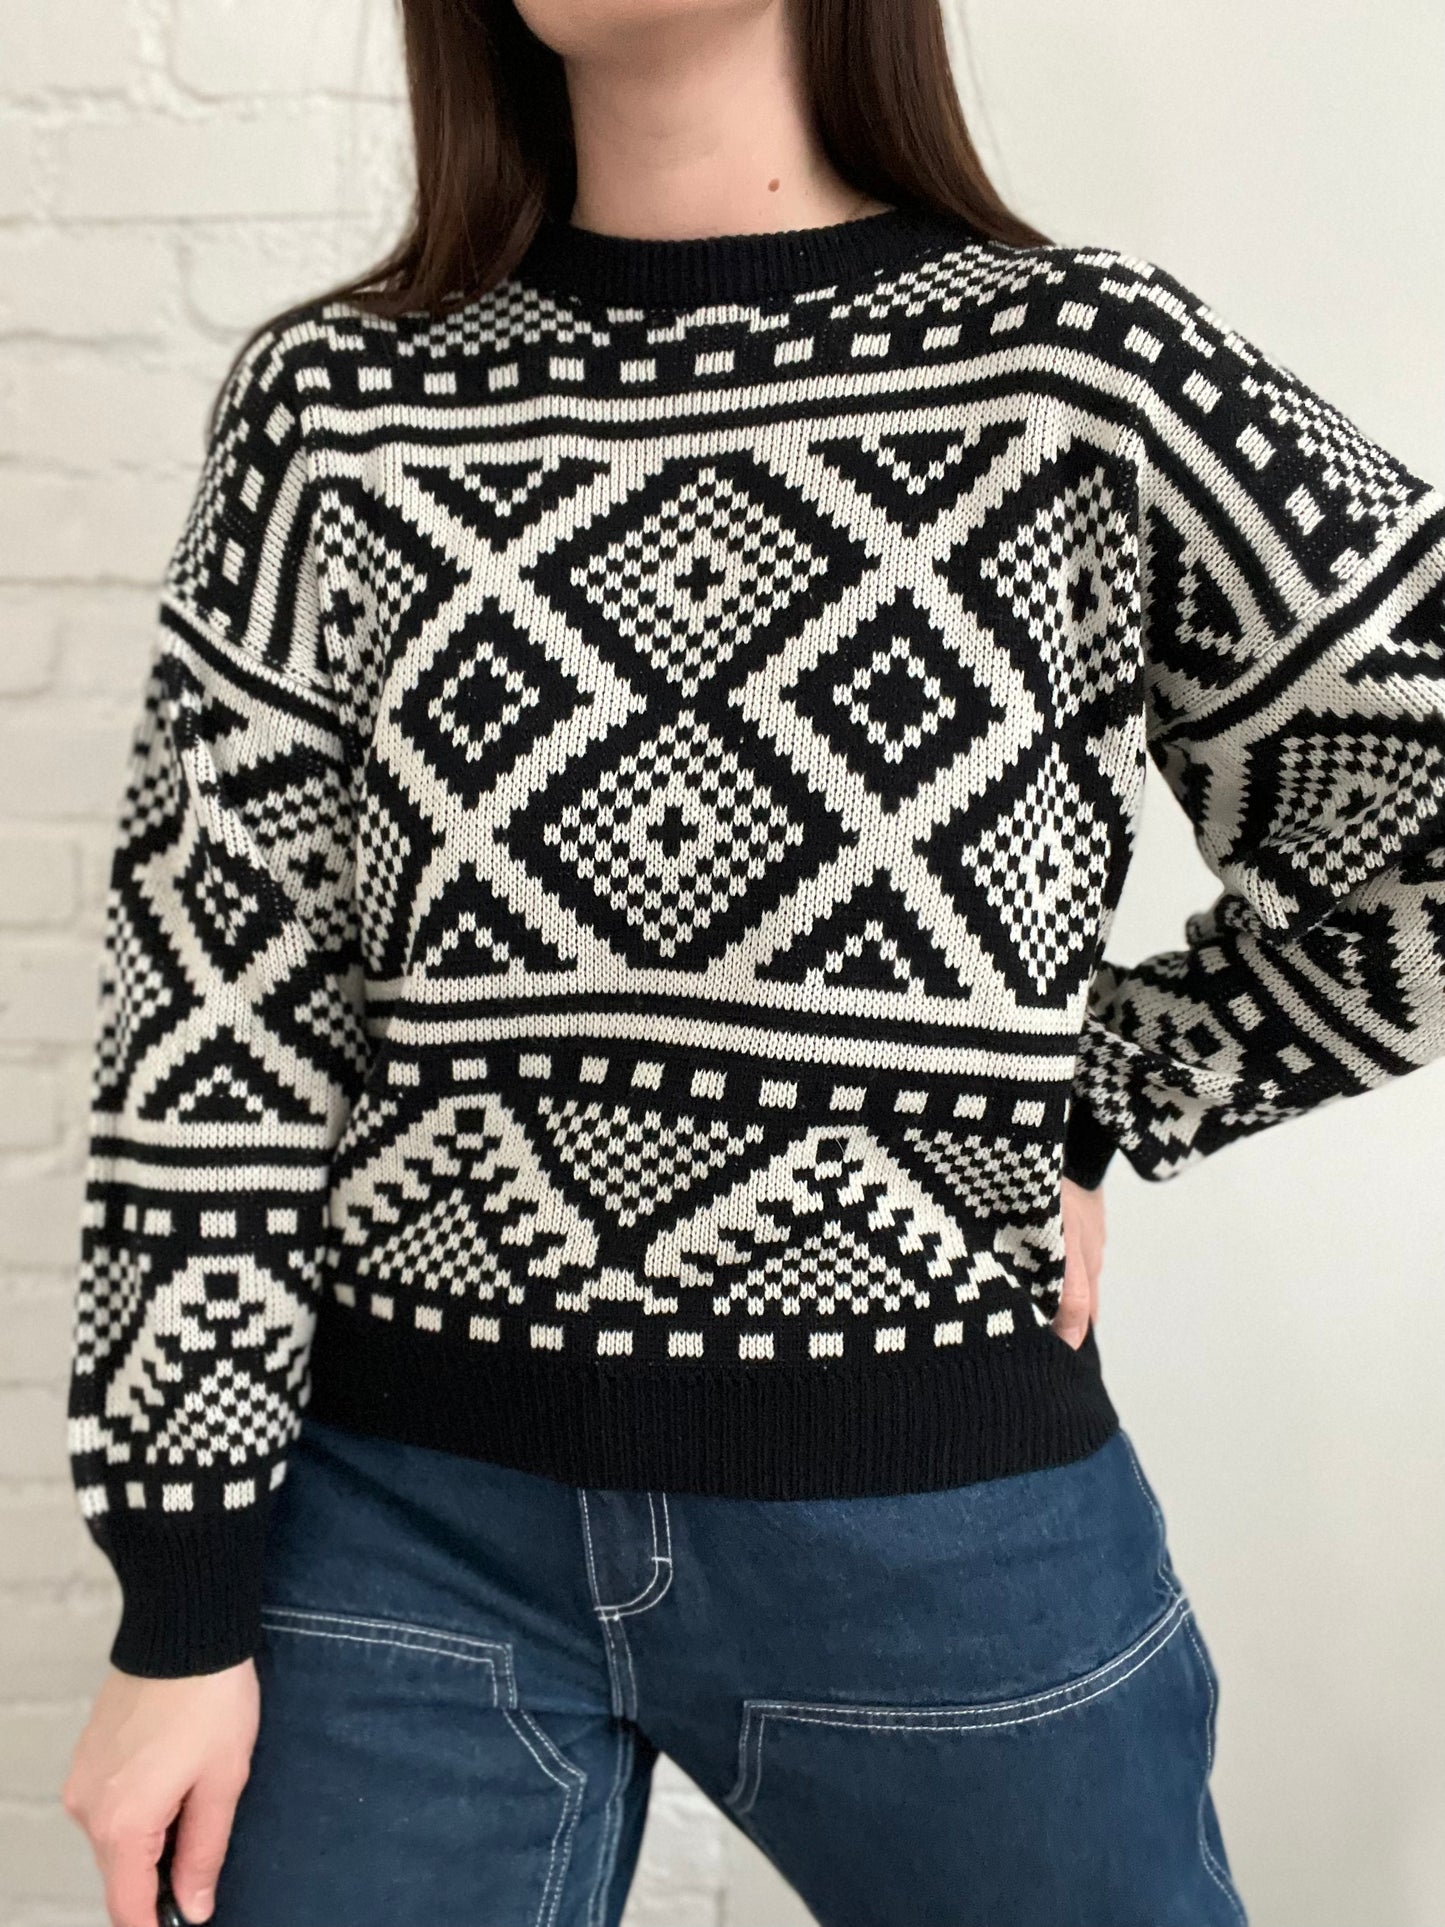 Abstract Artsy Knit Sweater - M/L